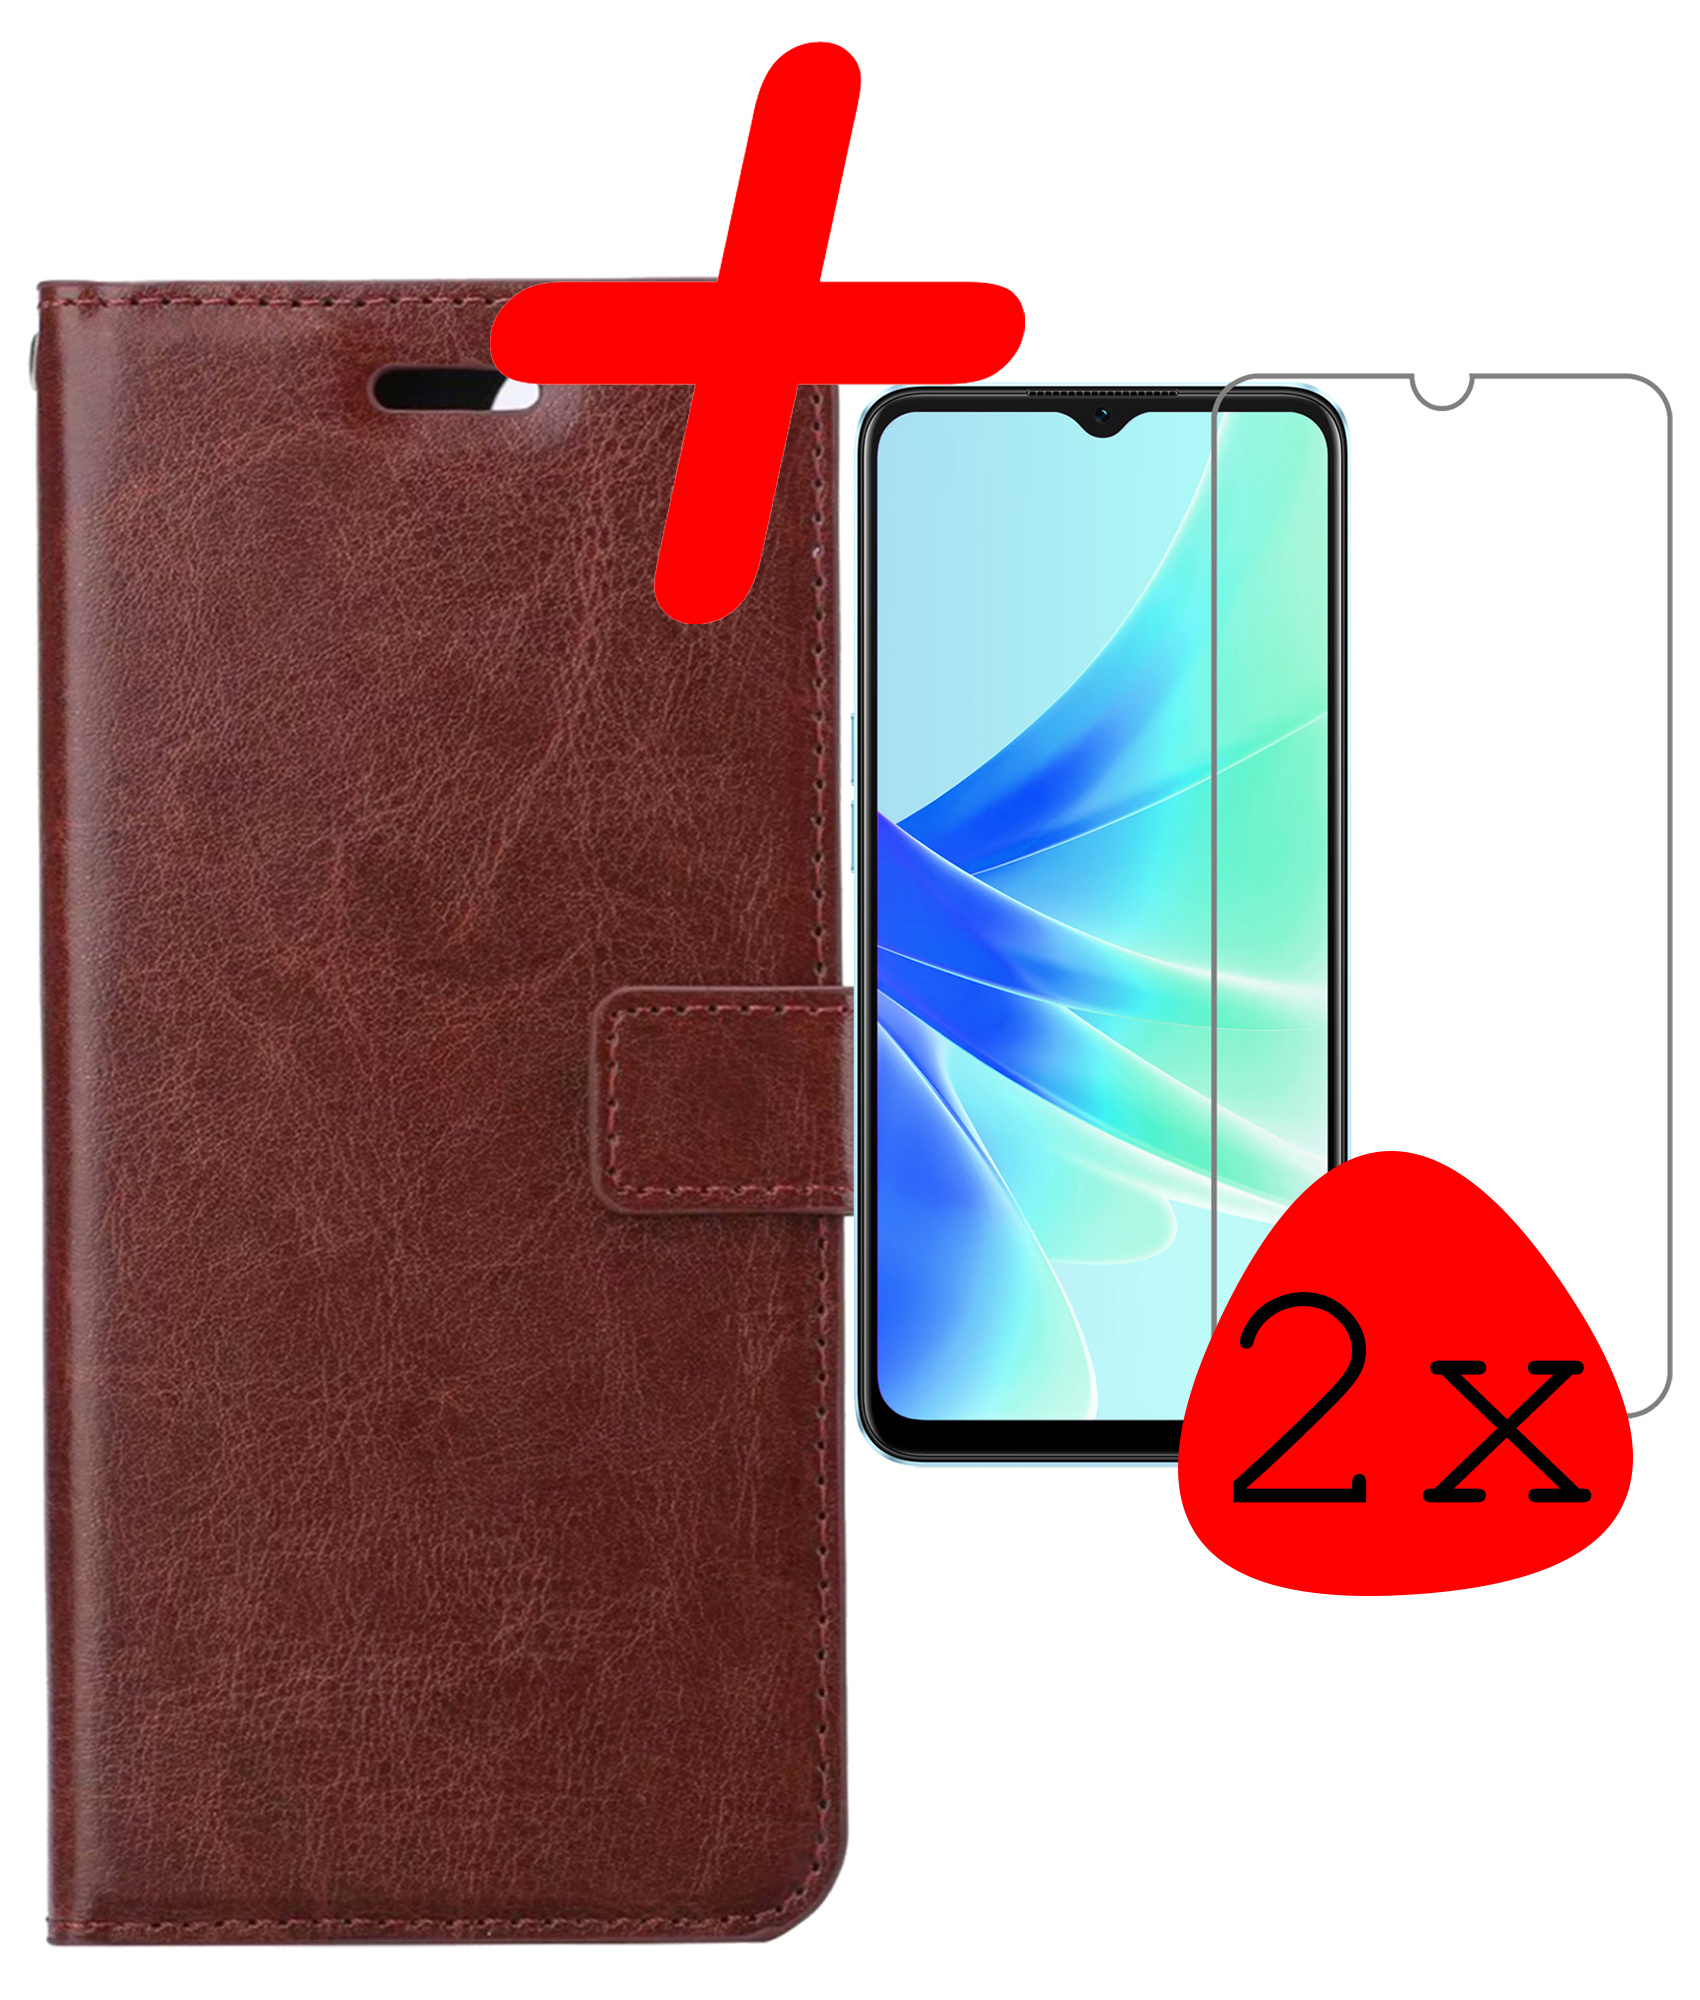 OPPO A17 Hoesje Bookcase Hoes Flip Case Book Cover 2x Met Screenprotector - OPPO A17 Hoes Book Case Hoesje - Bruin